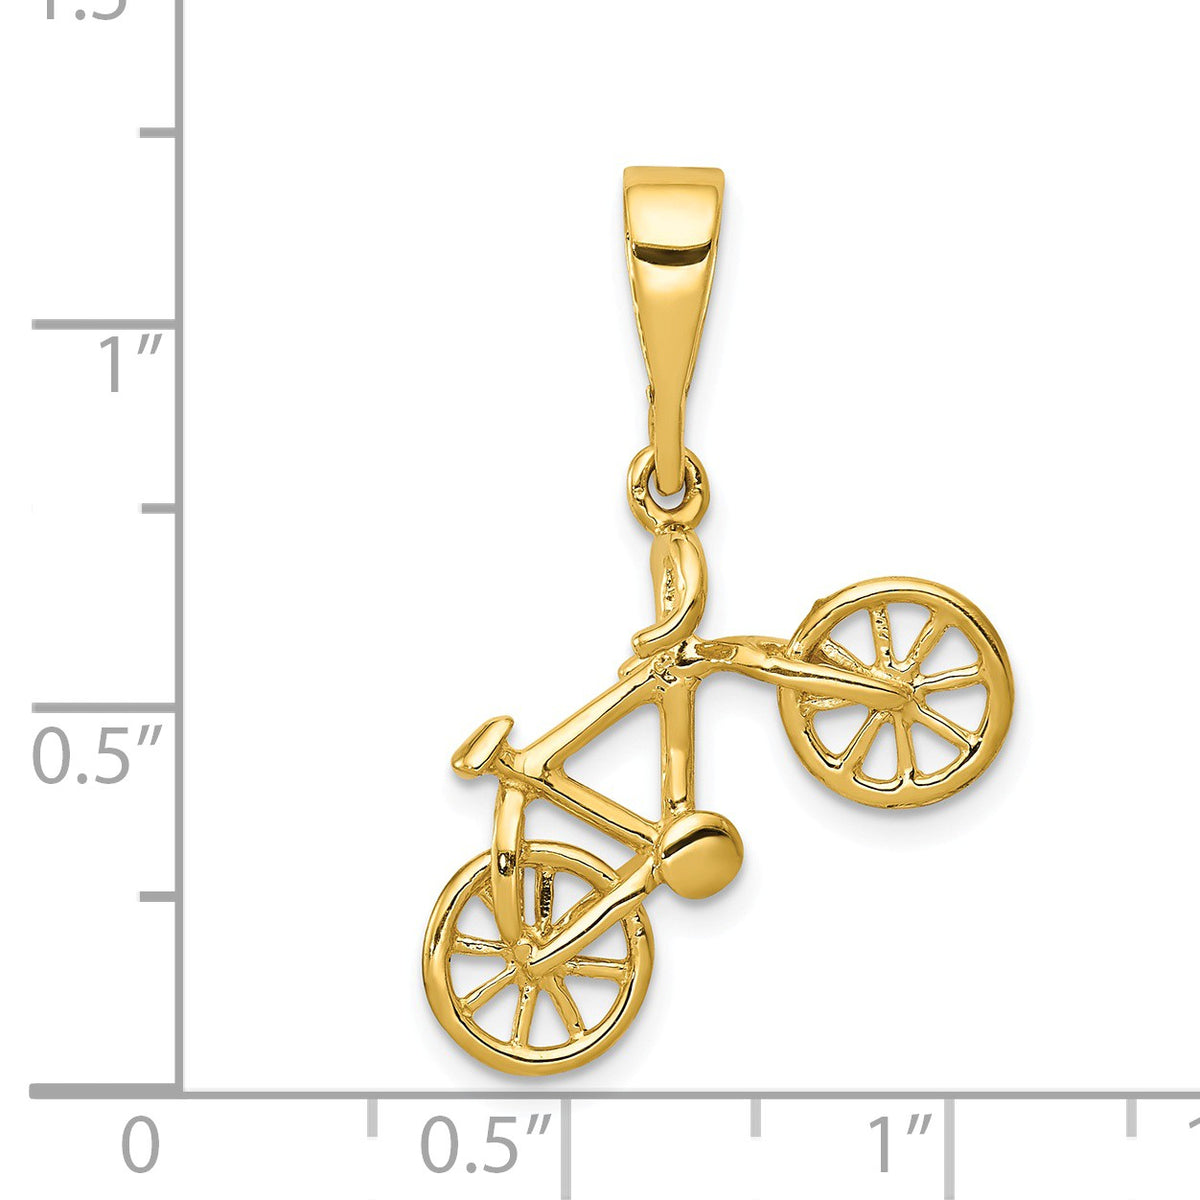 Alternate view of the 14k Yellow Gold Solid 3D Bicycle Pendant, 19 x 26mm (3/4 x 1 Inch) by The Black Bow Jewelry Co.